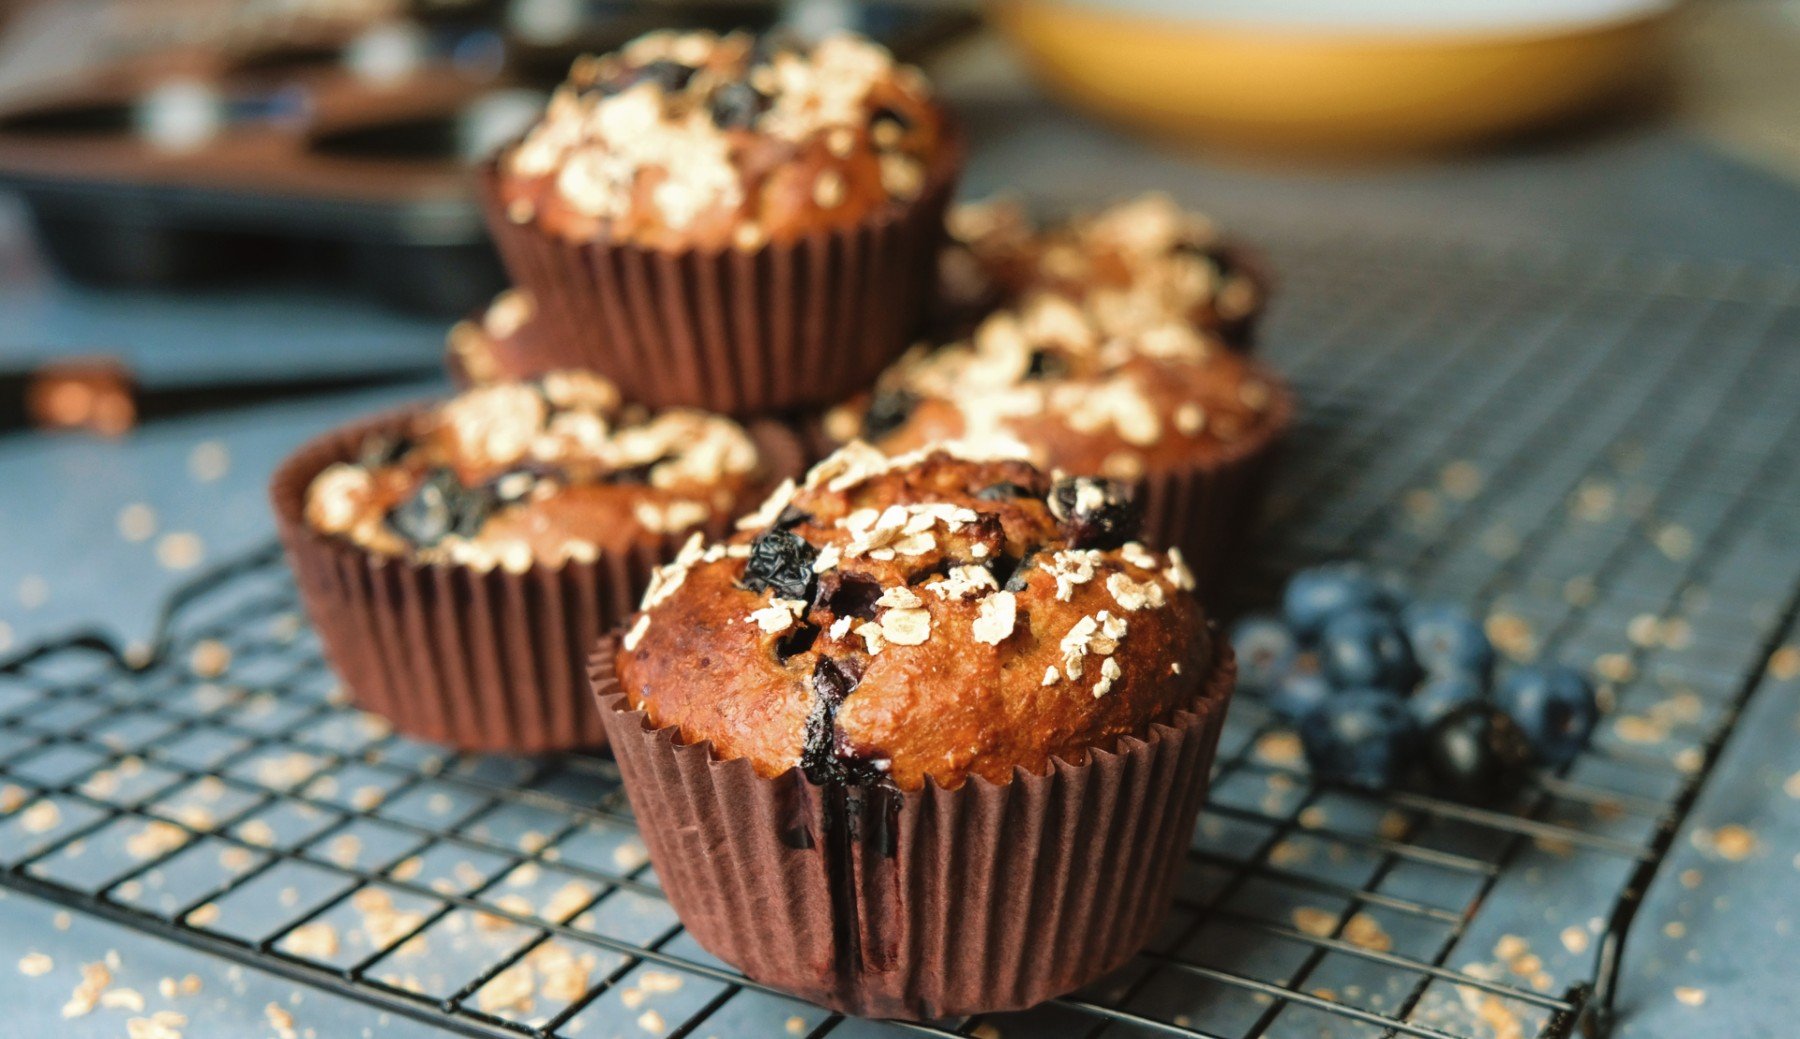 High-Protein Blueberry Oat Muffins